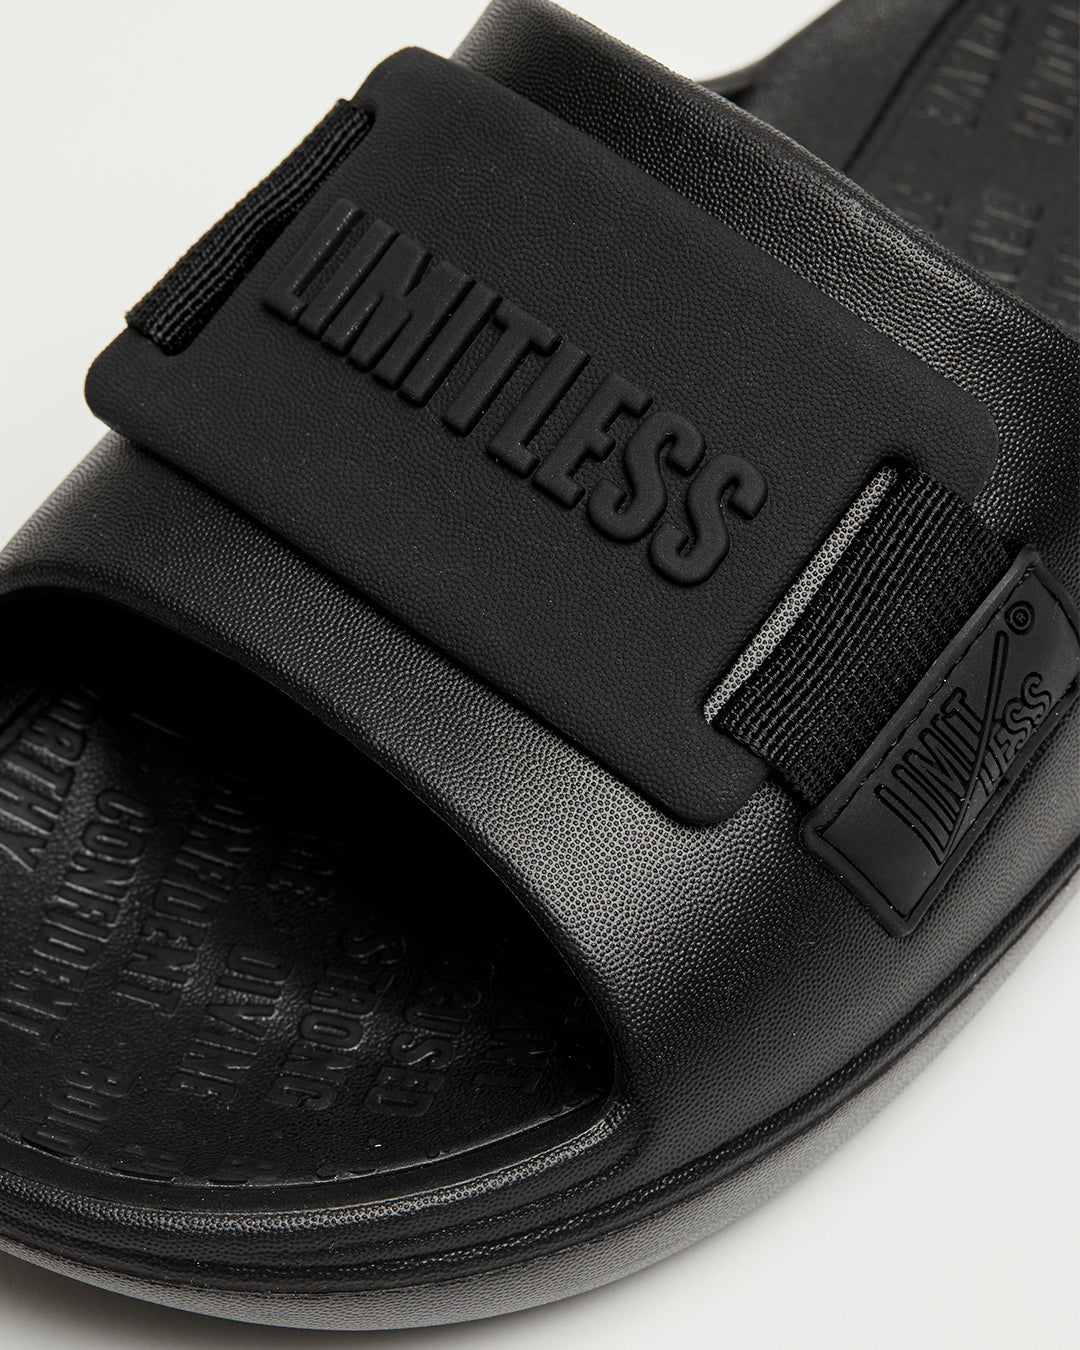 LIMITLESS SLIDES™ WITH ESSENTIAL TIBAH™ QUAD - MANATEE HIGH SCHOOL EDITION